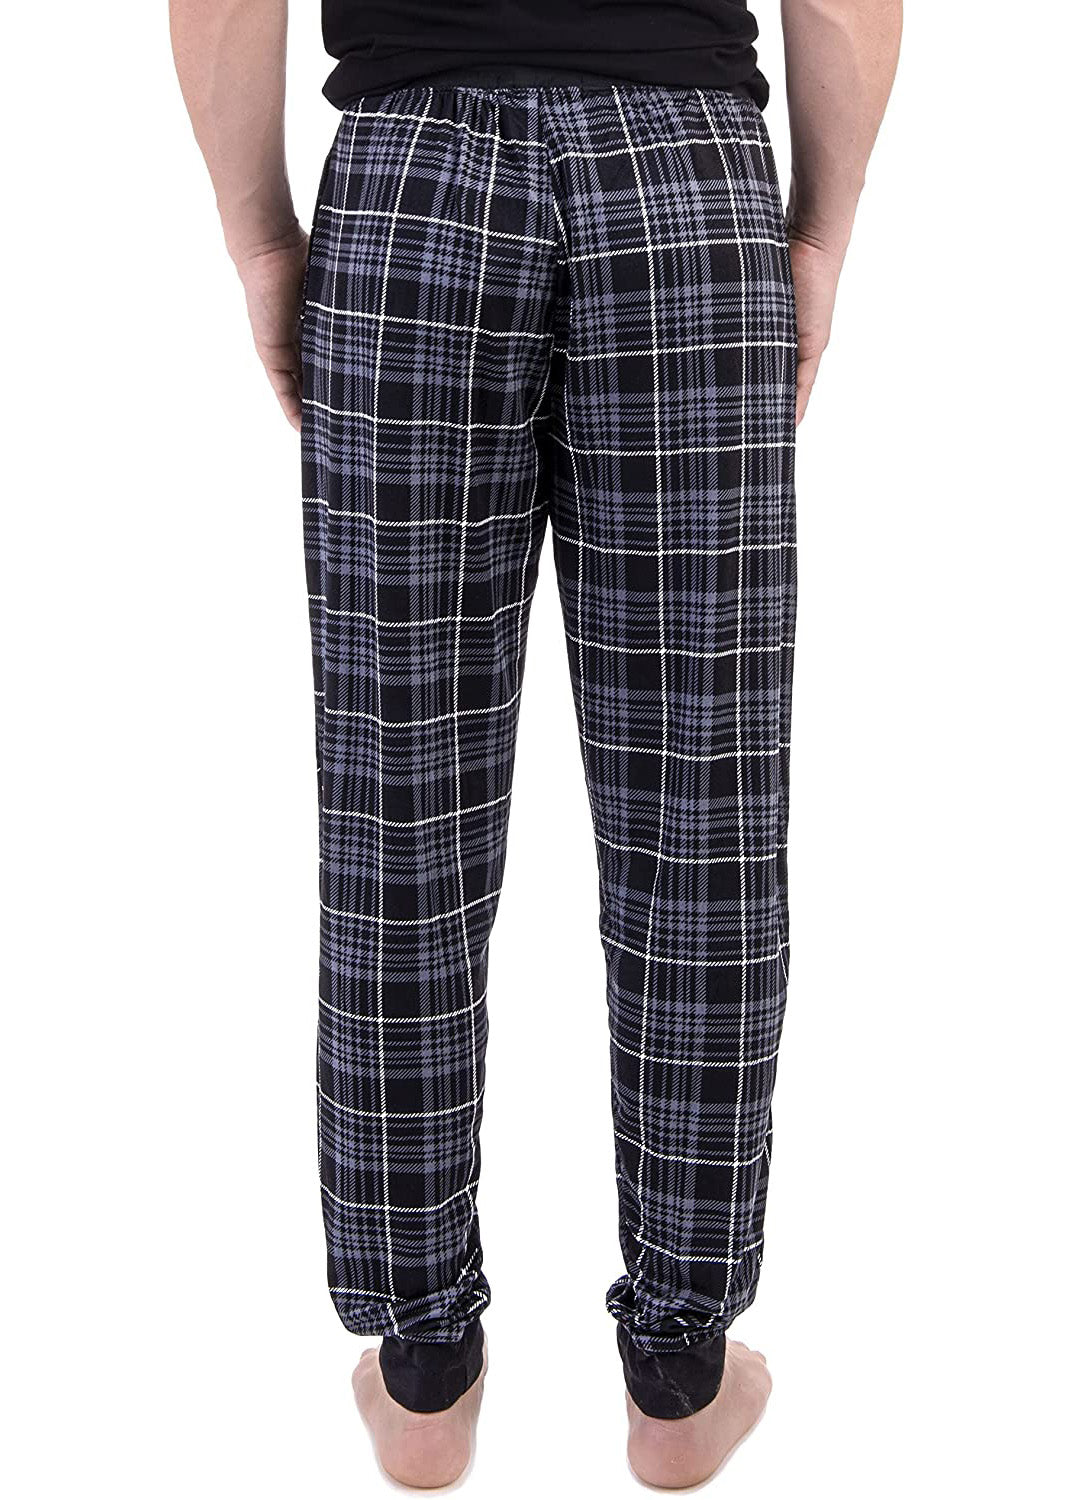 PJ joggers with soft velvety texture, stretch, elastic waistband, drawstring, and stylish ankle cuff. This pattern is a grey, black and white plaid. The waist and the cuffs are black